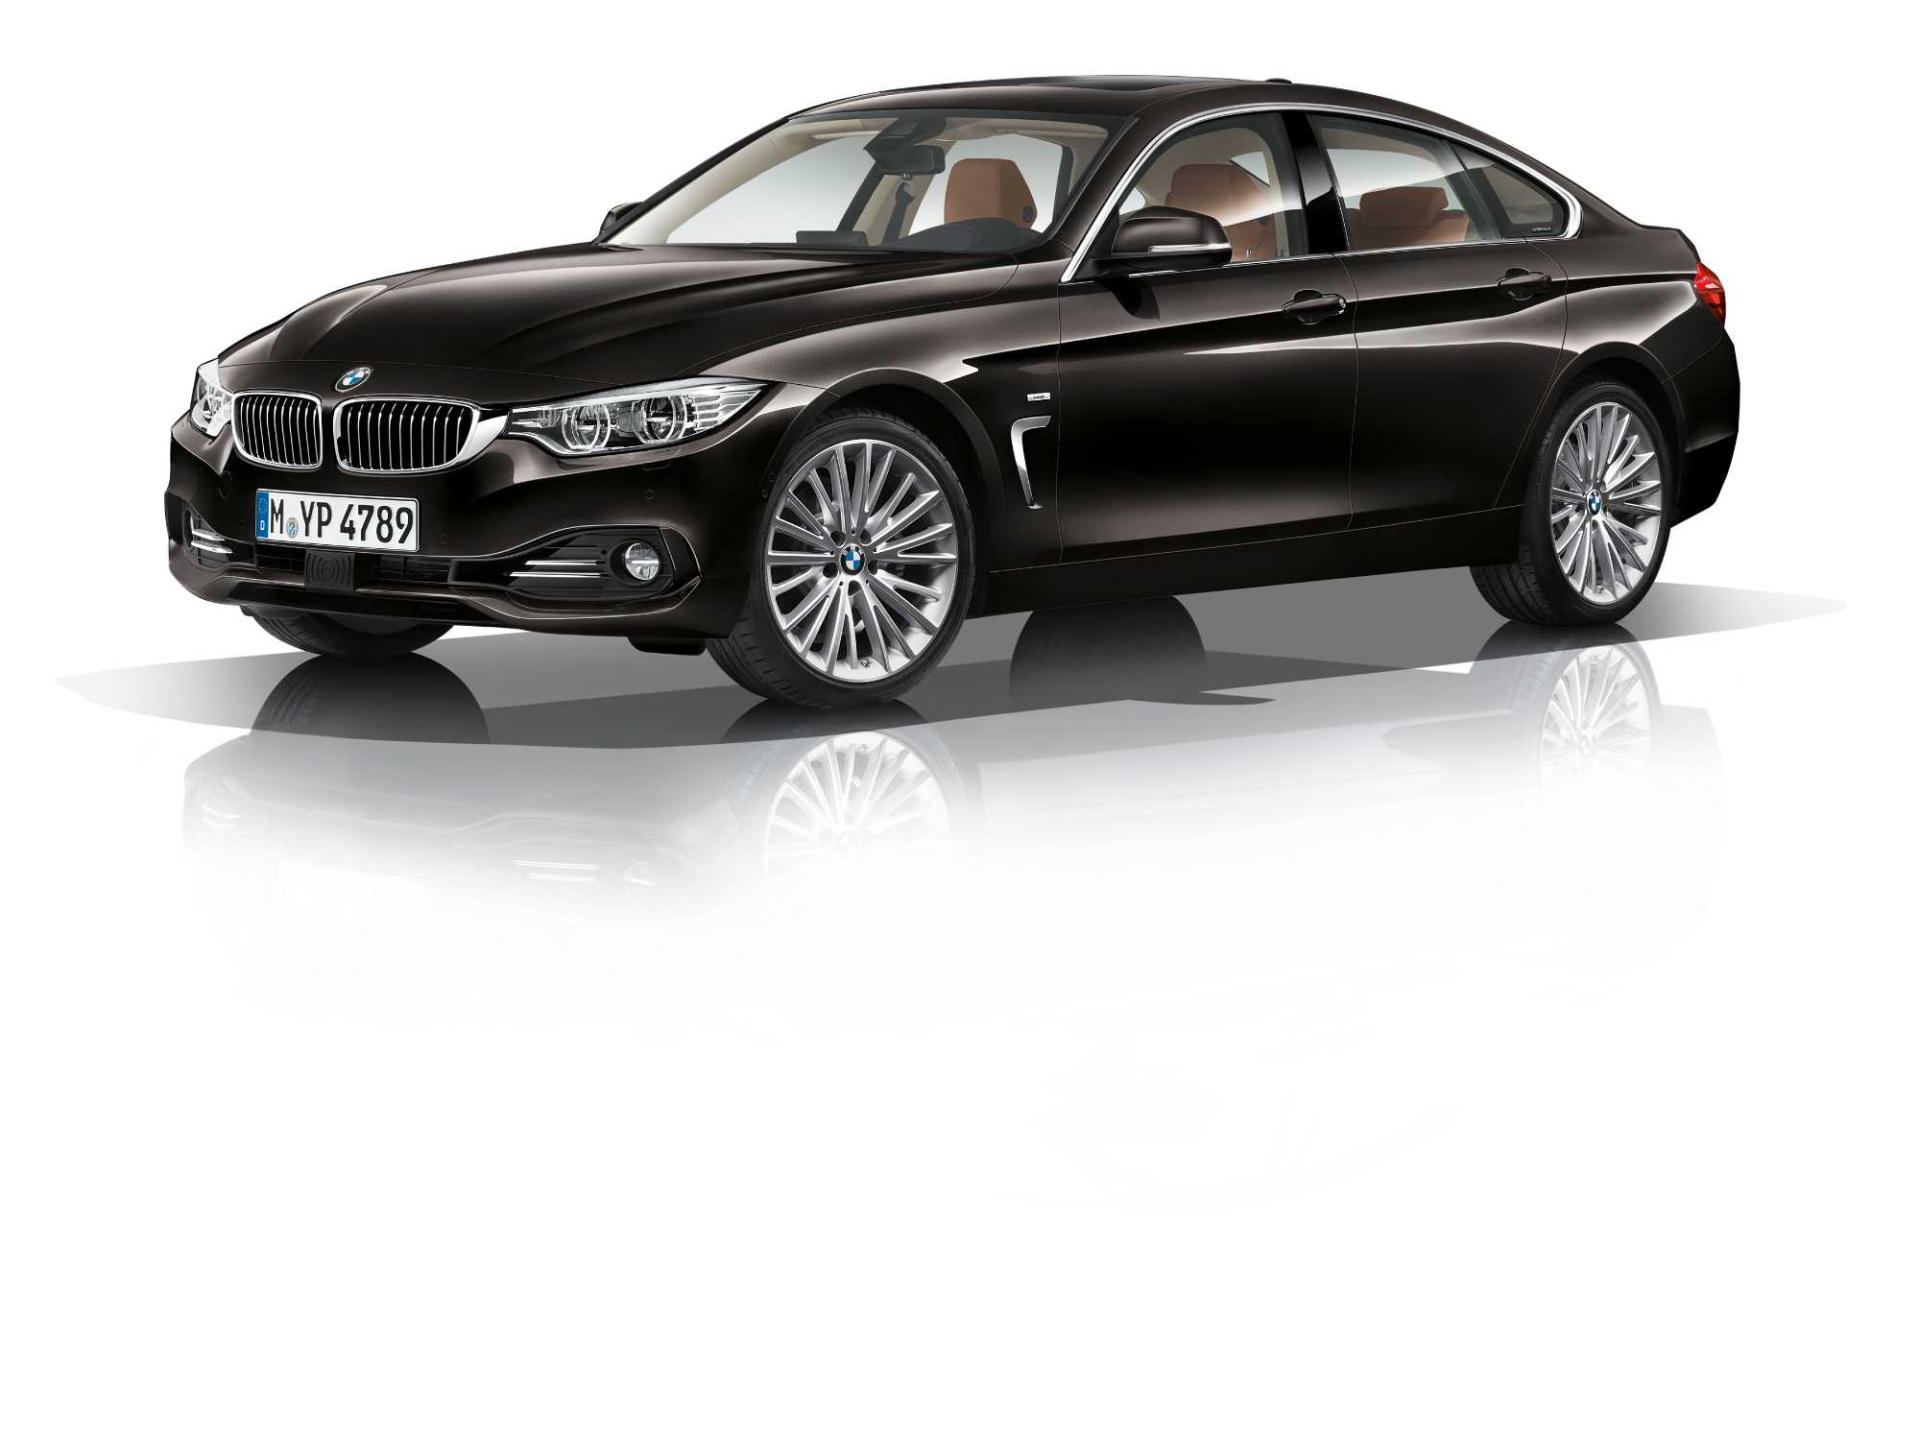 2014 BMW 4 Series Gran Coupe News and Information